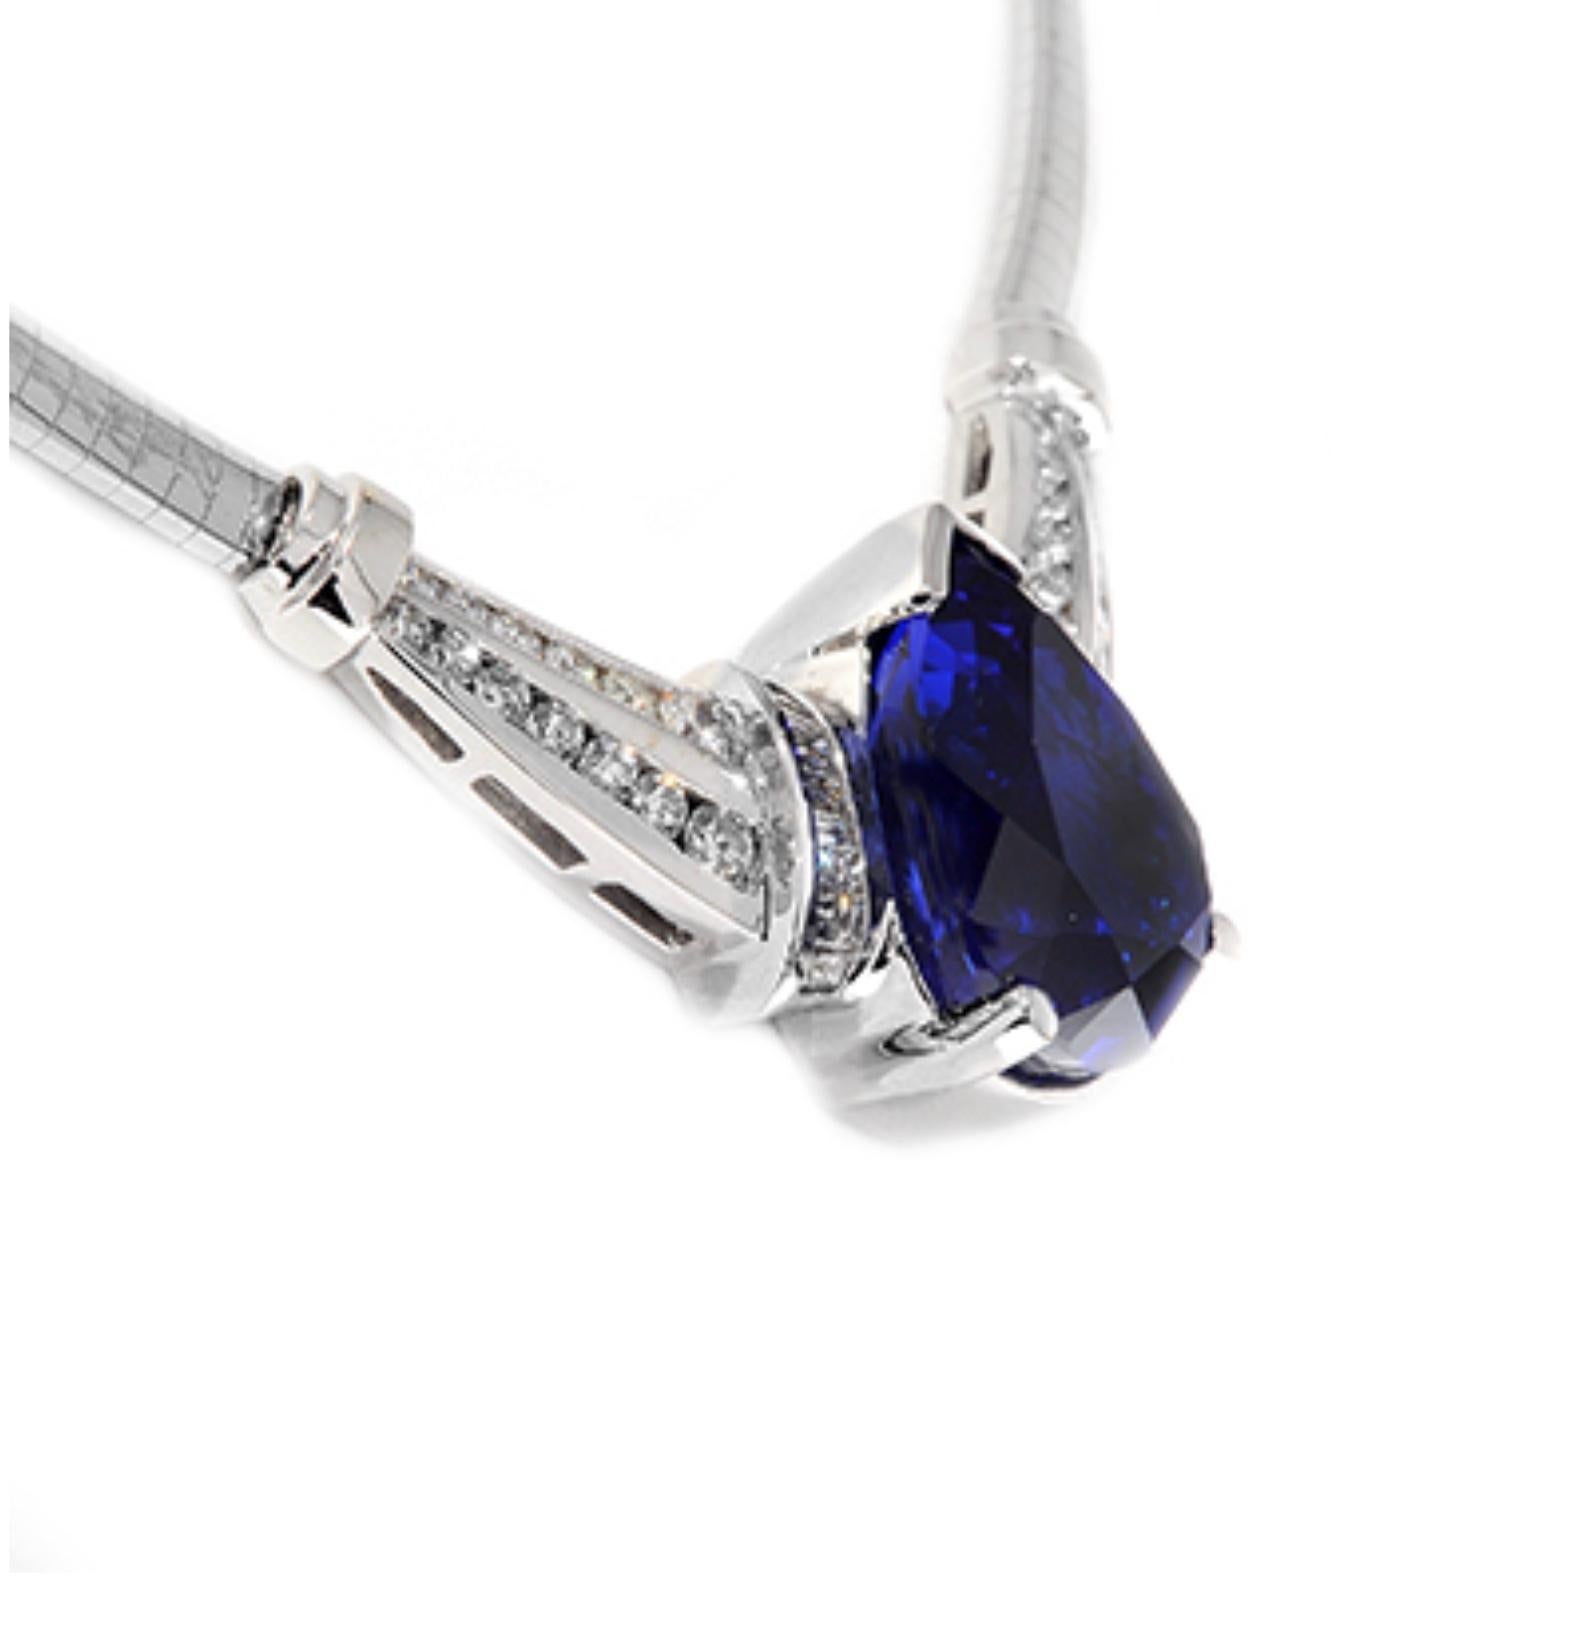 TANZANITE AND DIAMOND NECKLACE
An exceptional example of master craftsmanship, this pear shape Tanzanite is suspended amongst baguette and round diamonds.
Item:	# 01633
Metal:	18k W
Color Weight:	39.20 ct.
Diamond Weight:	3.18 ct.